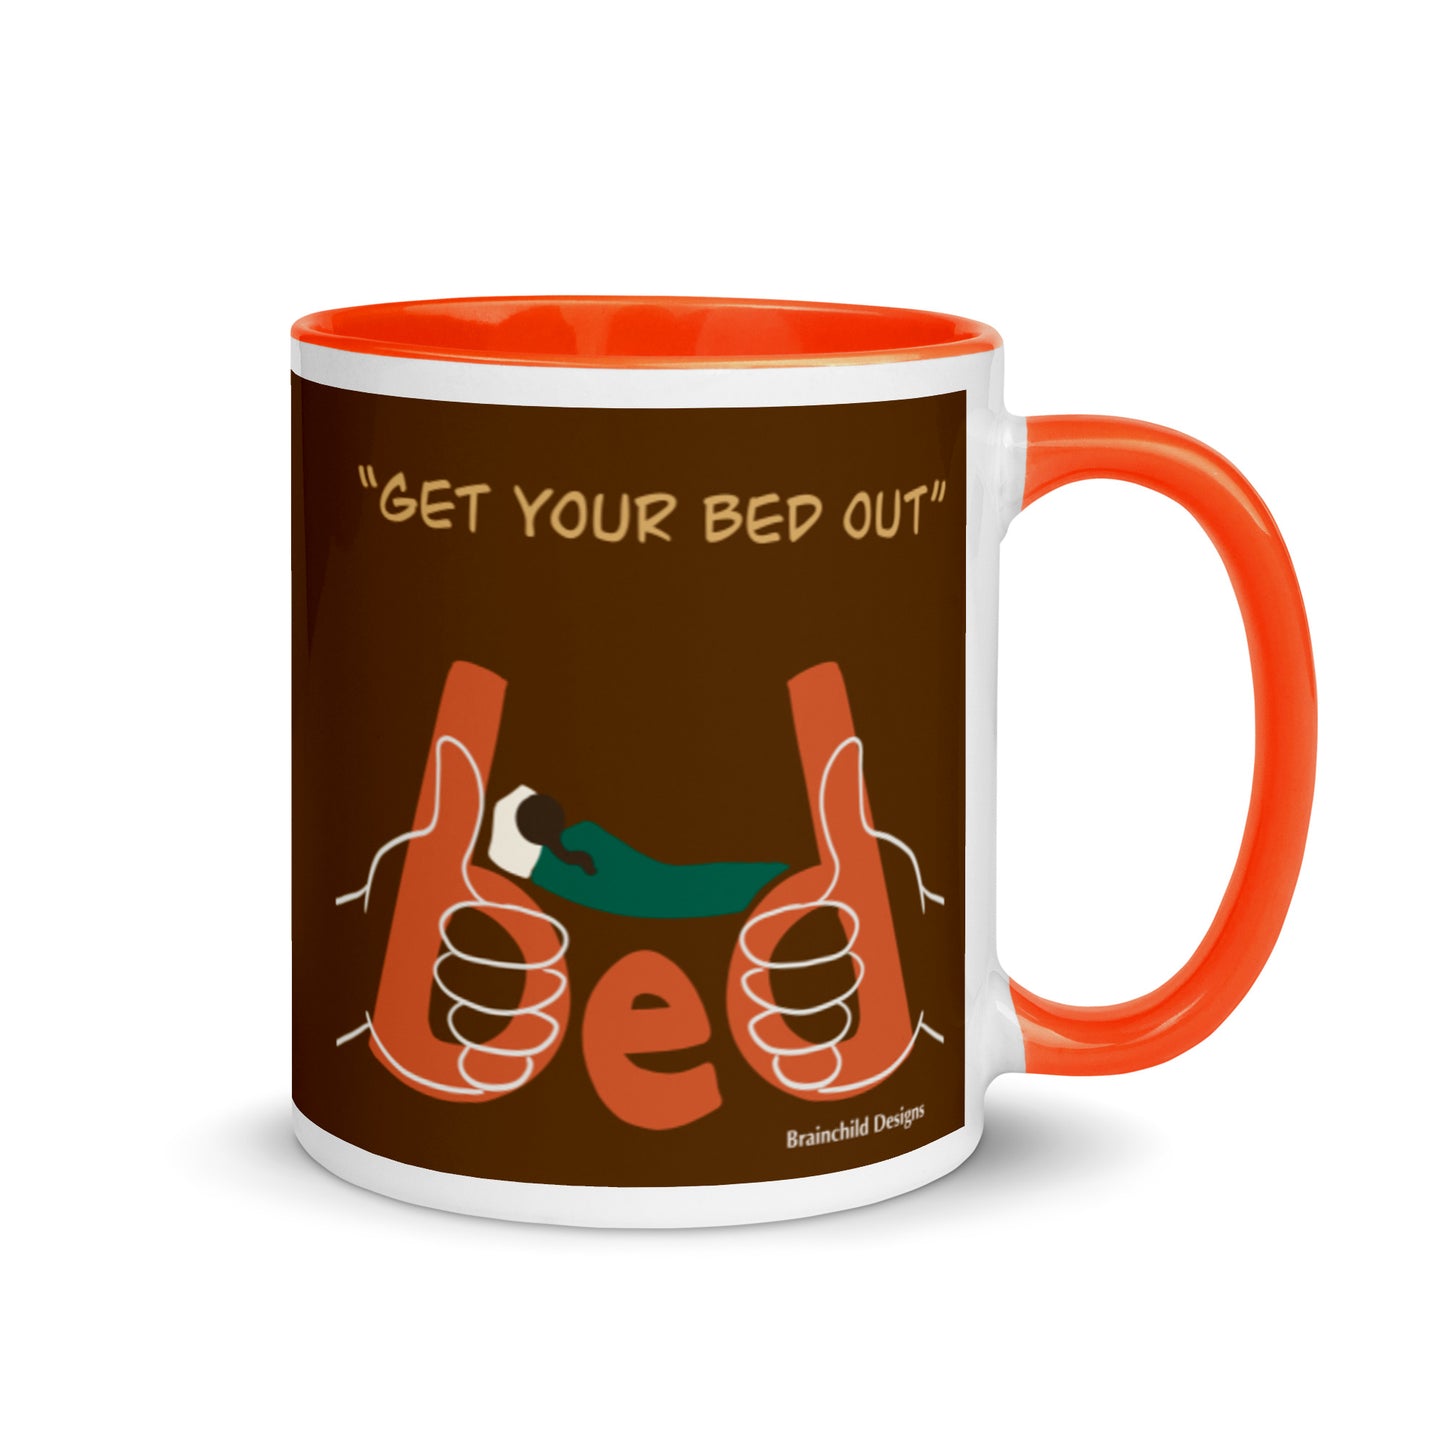 Get your "Bed" out - Brainchild Designs